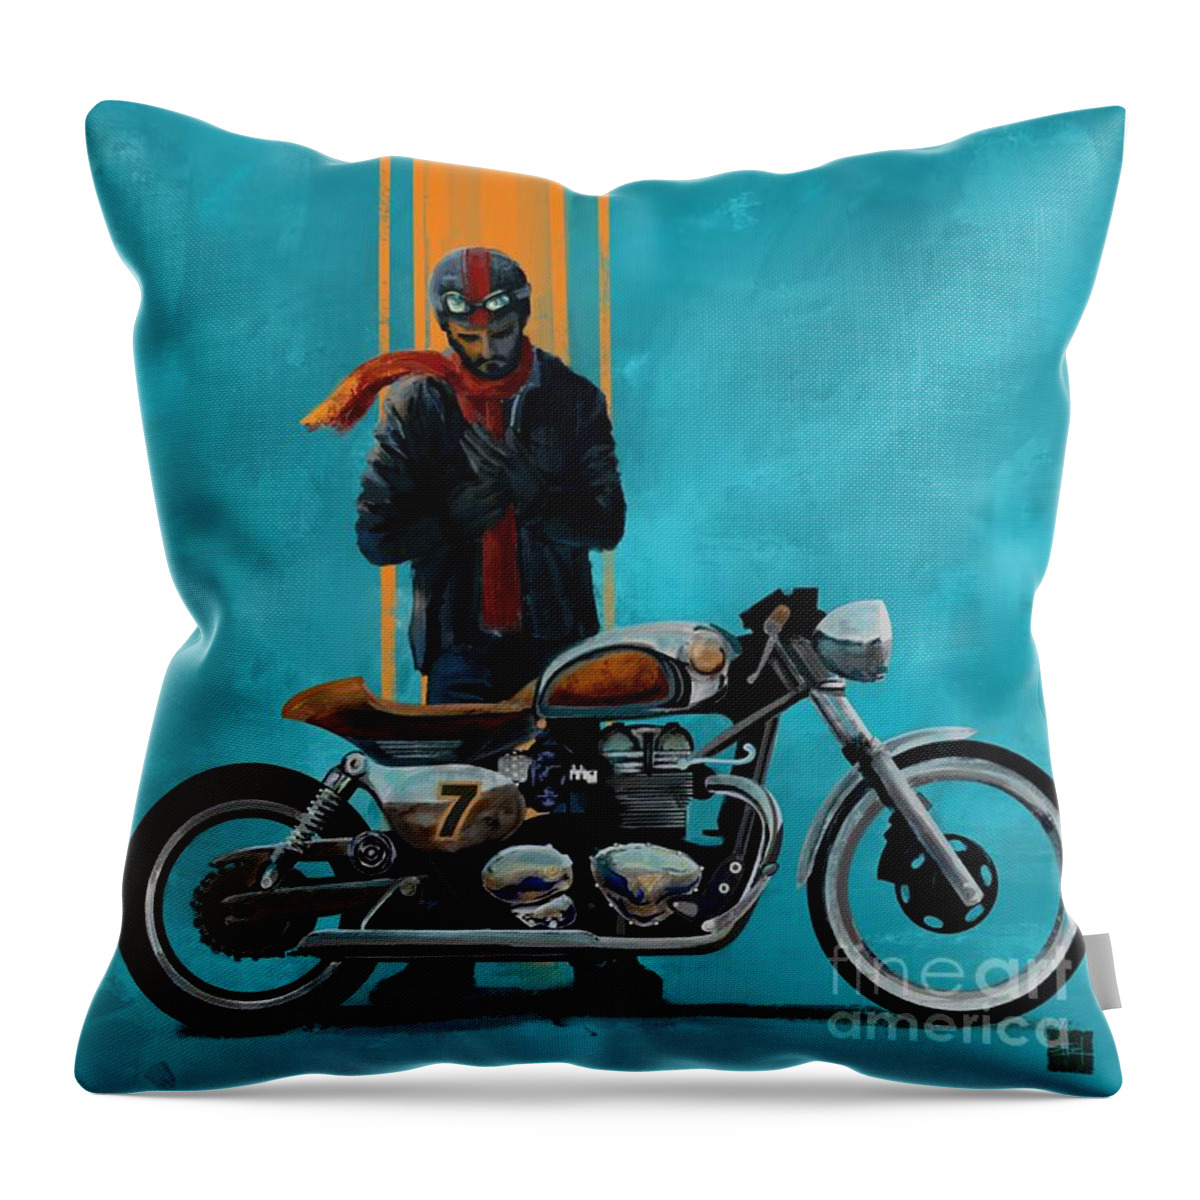 Cafe Racer Throw Pillow featuring the painting Vintage Cafe racer by Sassan Filsoof